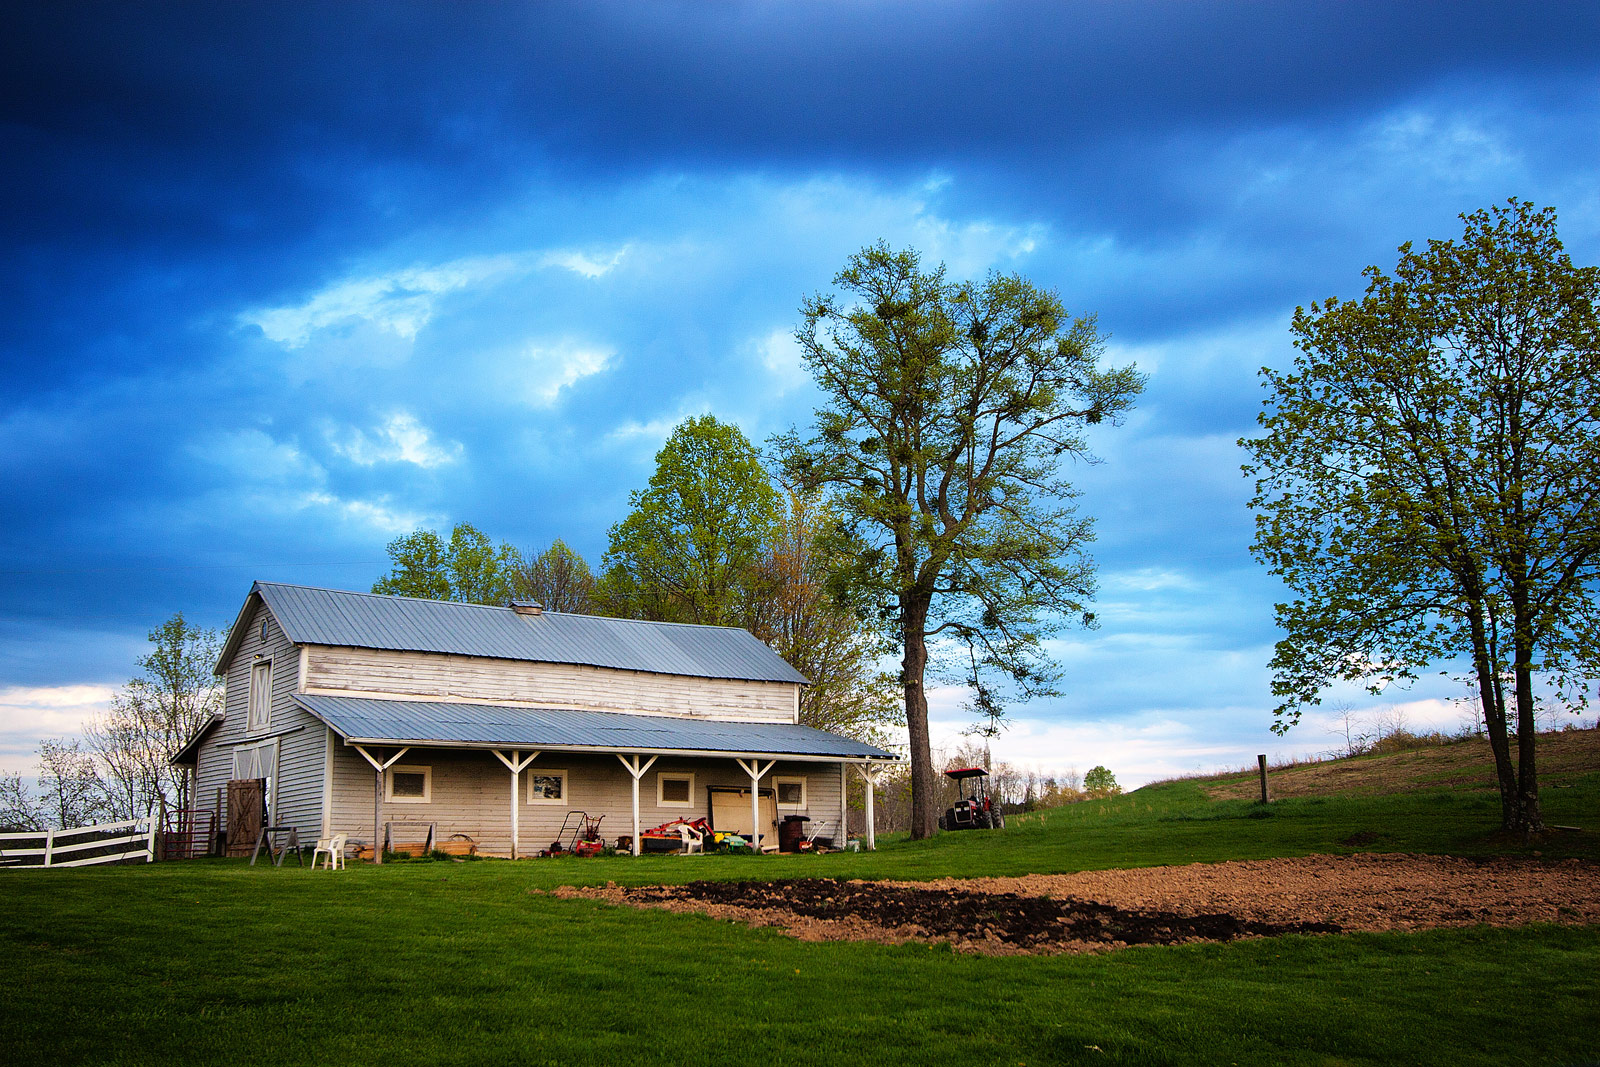 Old farm scene in Putnam County WV - Landscape Photography By Sean Rose